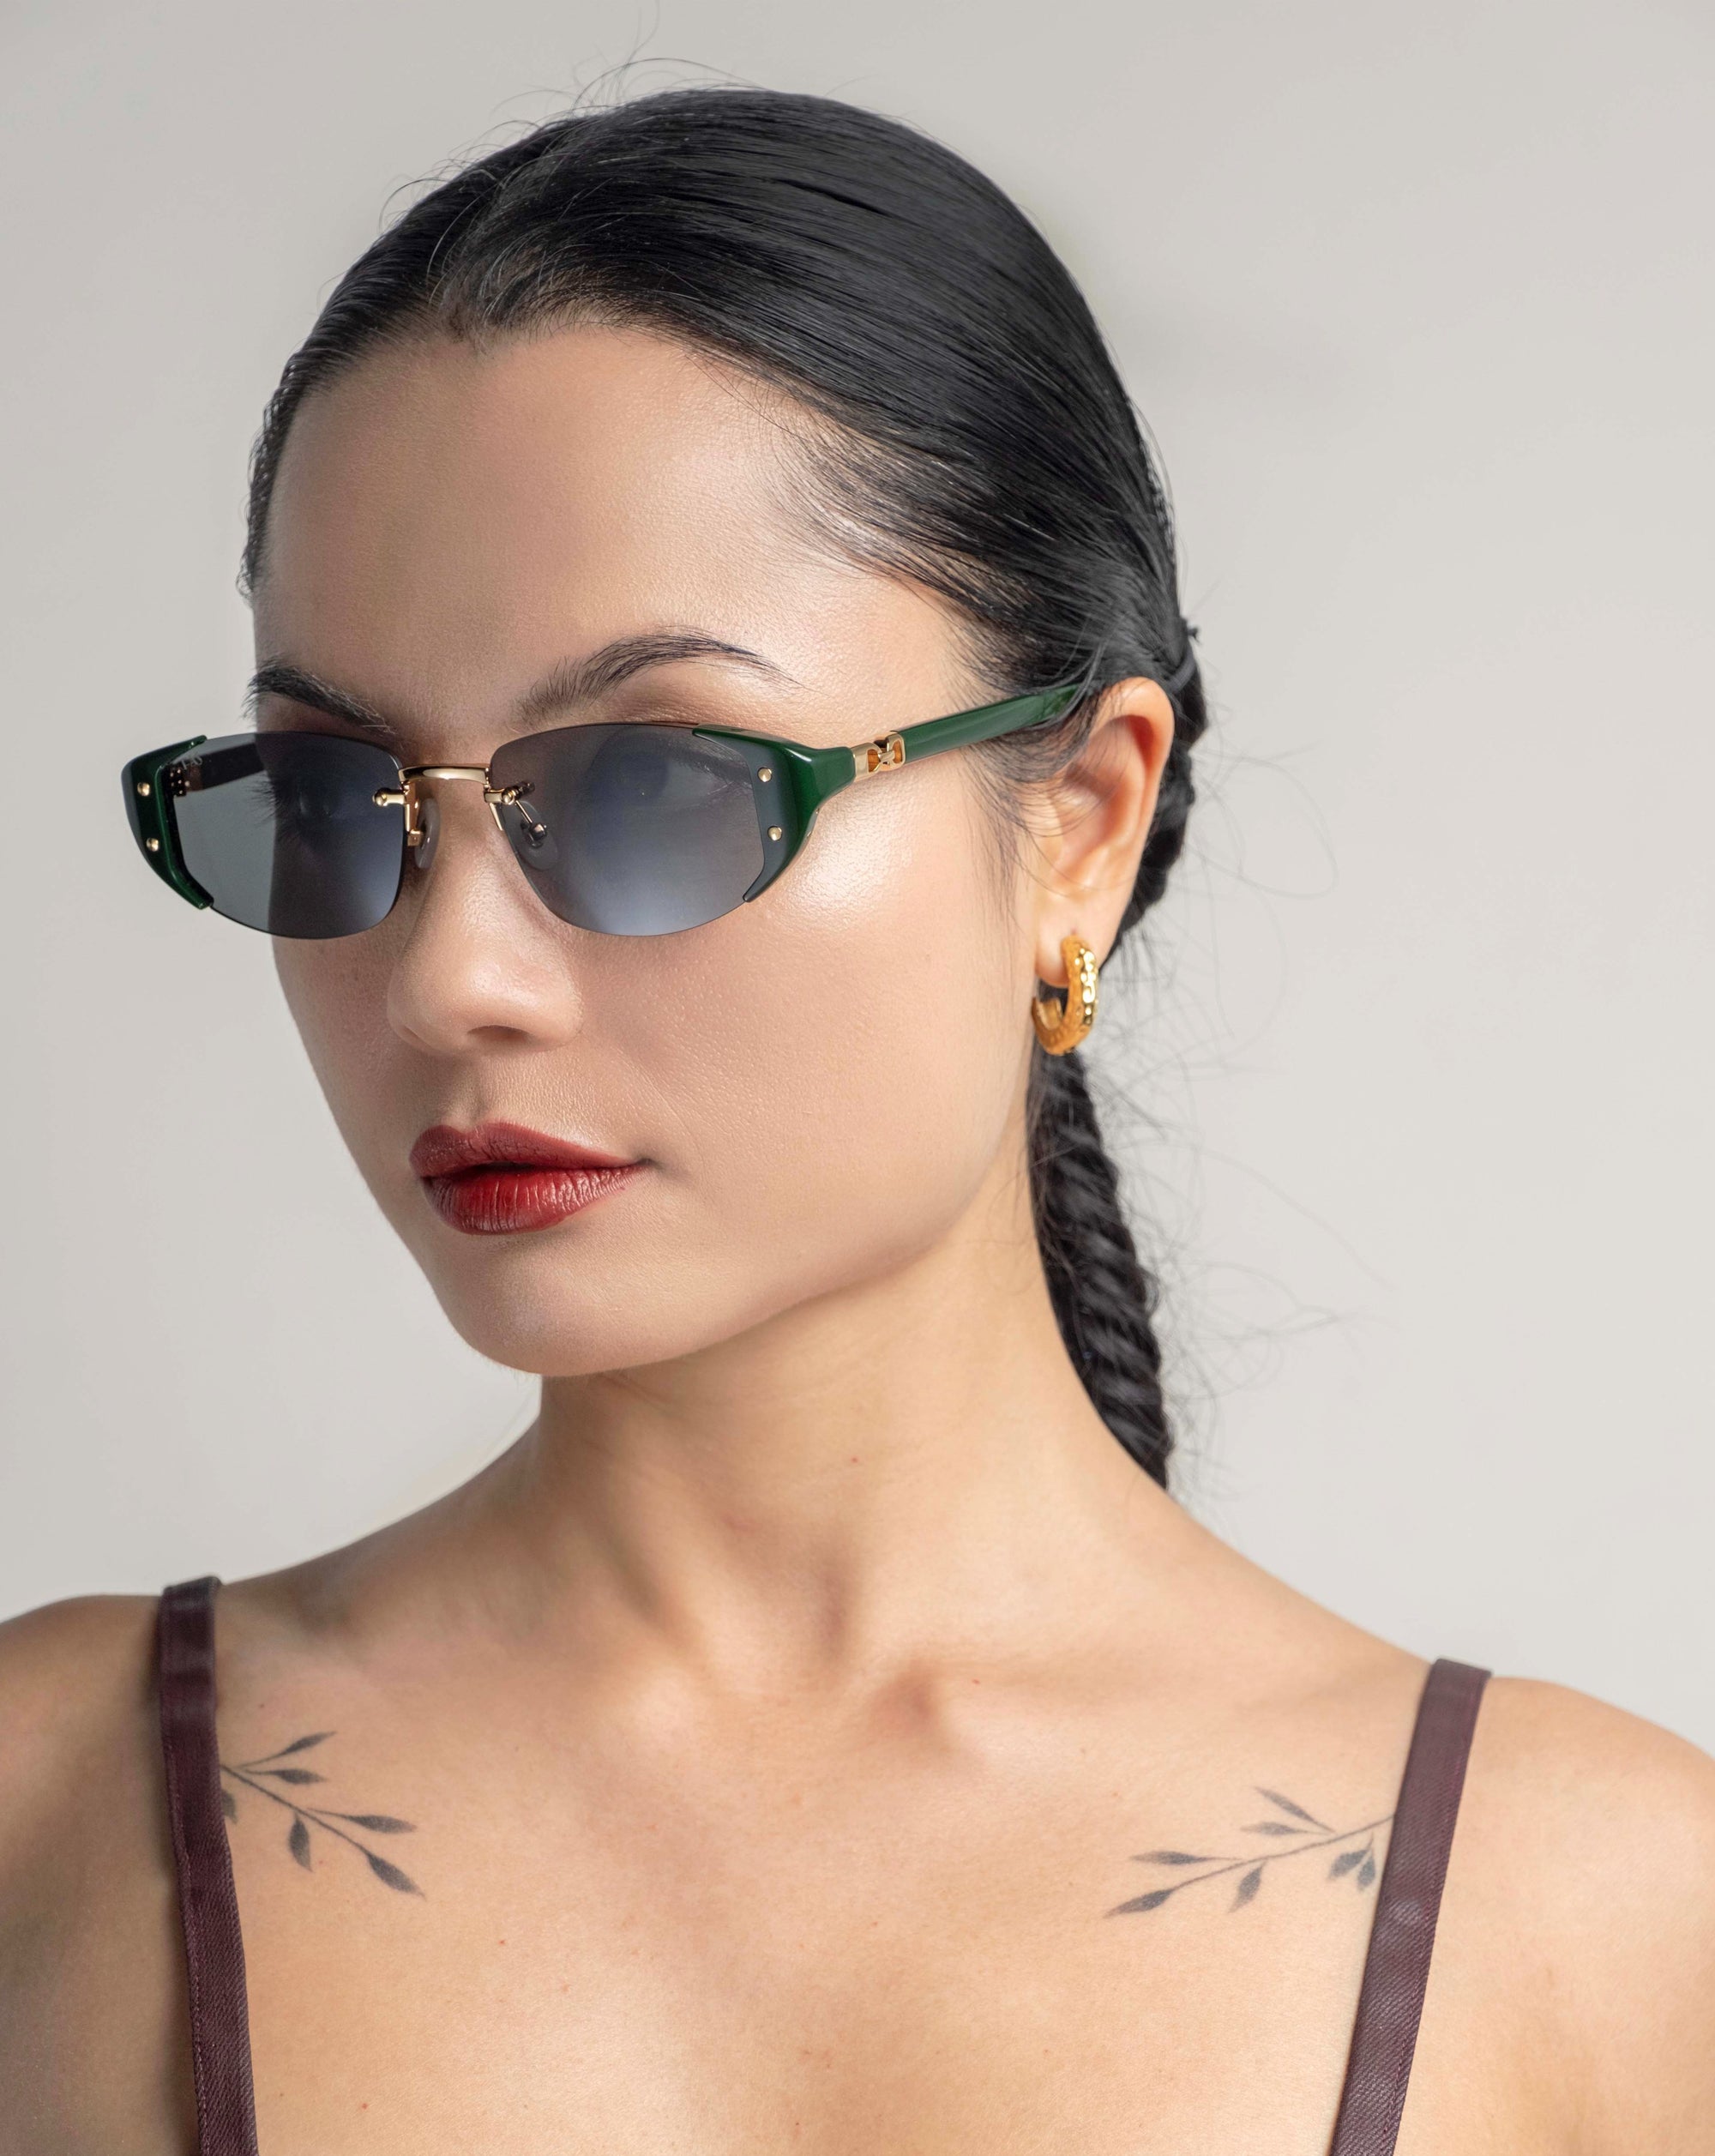 A woman with dark hair tied in a braid is wearing Harbour sunglasses by For Art&#39;s Sake® and a brown strappy top. She accessorizes with 18 karat gold-plated hoop earrings and has small branch-like tattoos on her chest. The background is plain and light-colored, adding to the elegant, retro-inspired design of her look.